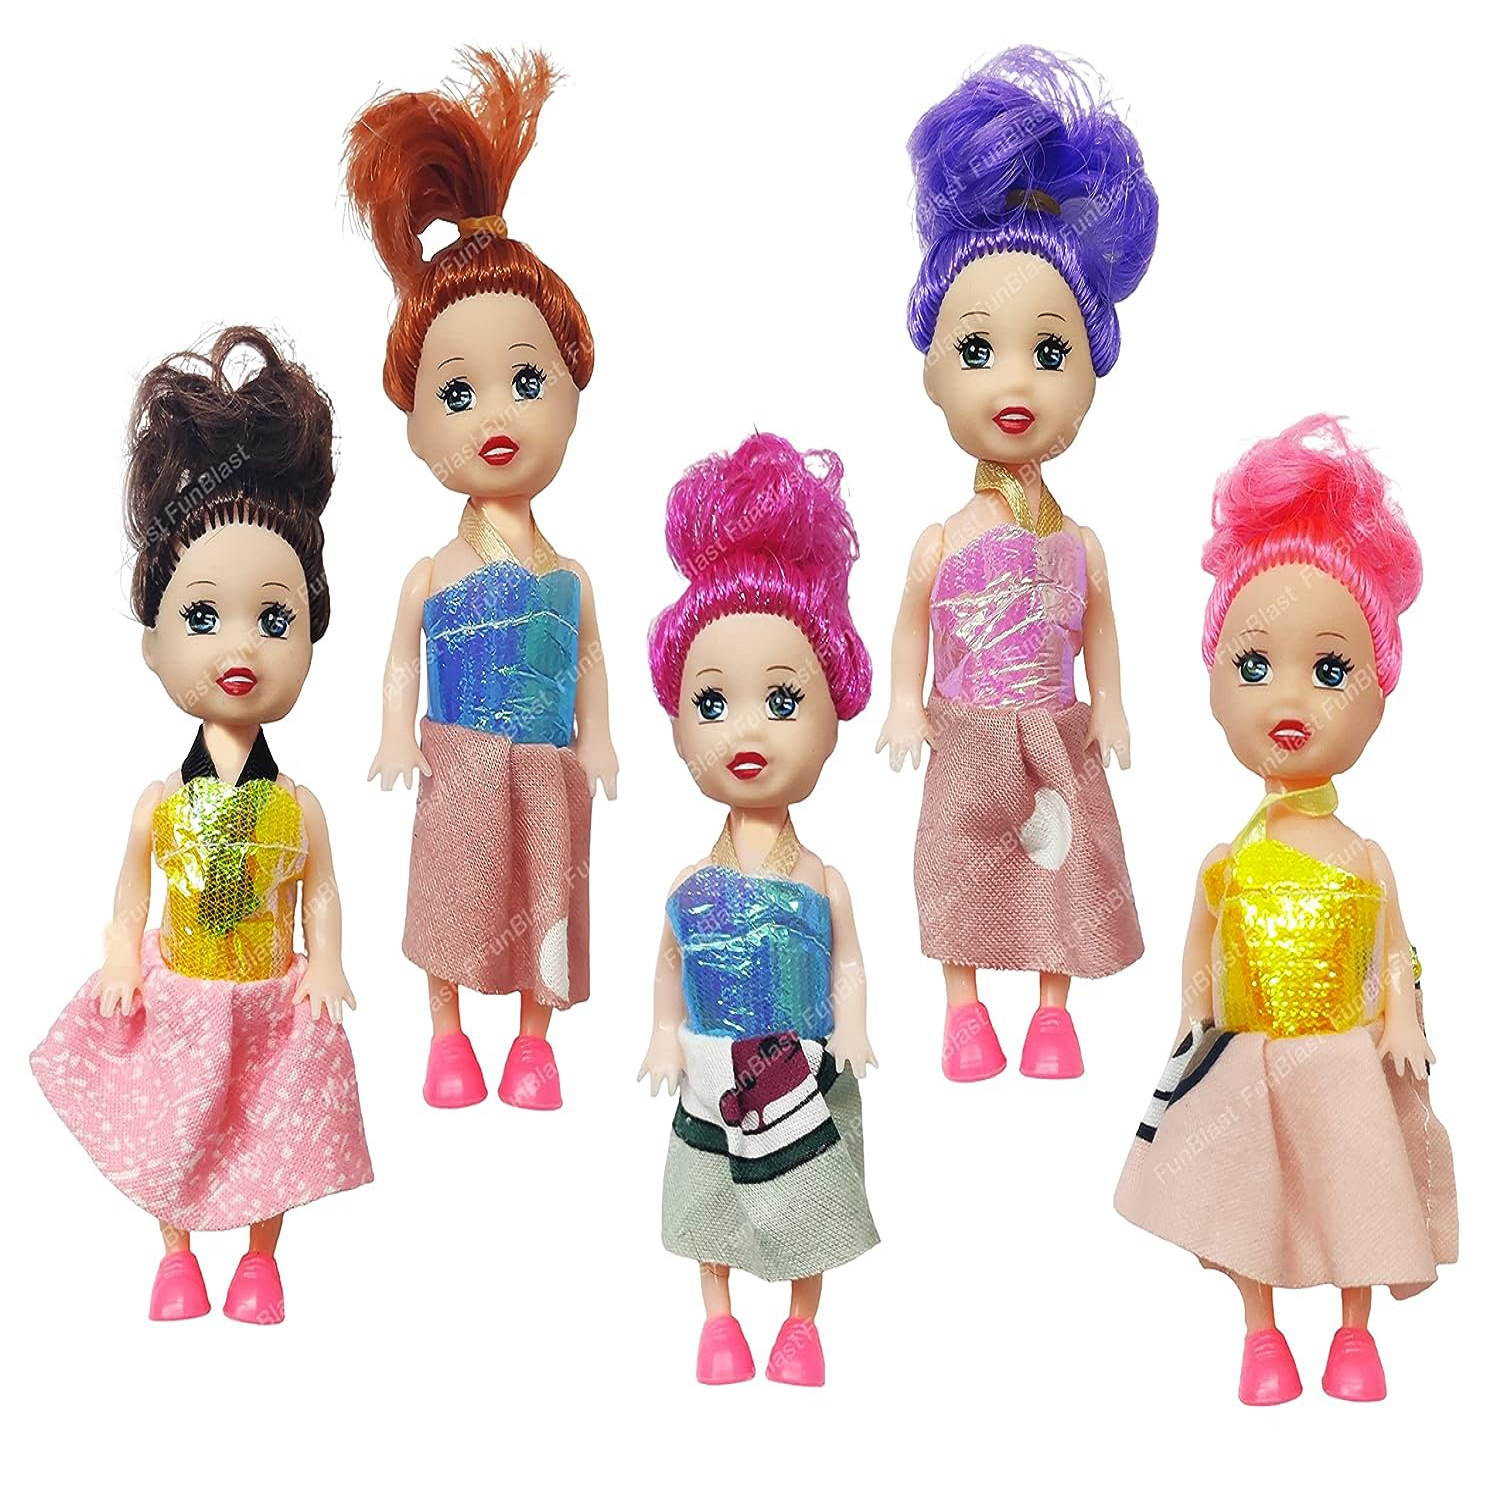 Doll Toys for Kids, (Pack of 5 Pcs)- Small Doll for Girls- 10 CM